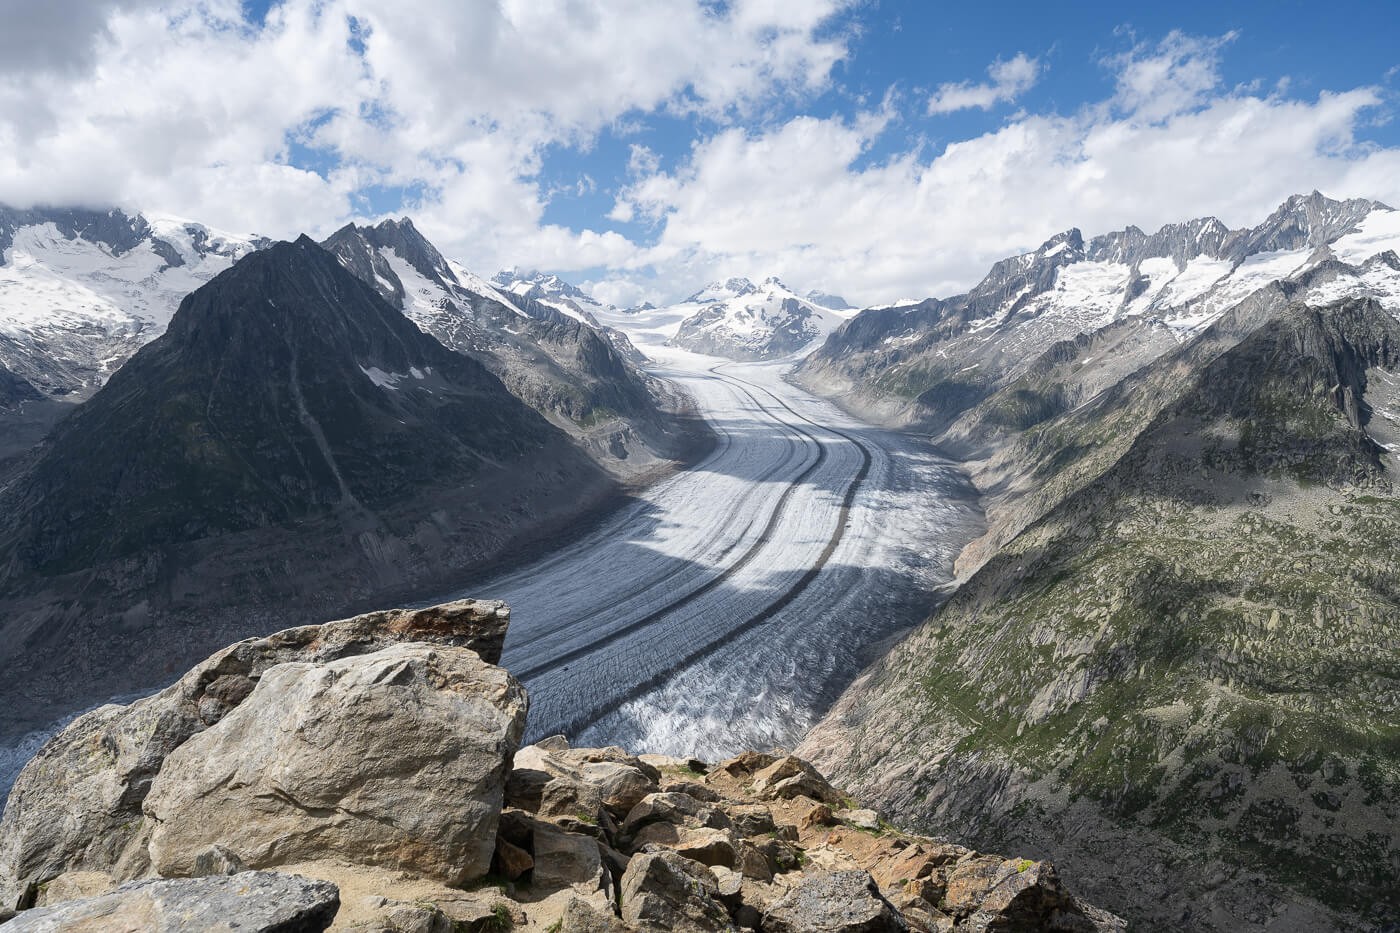 The Aletsch Glacier views from the Eggishorn during a hike